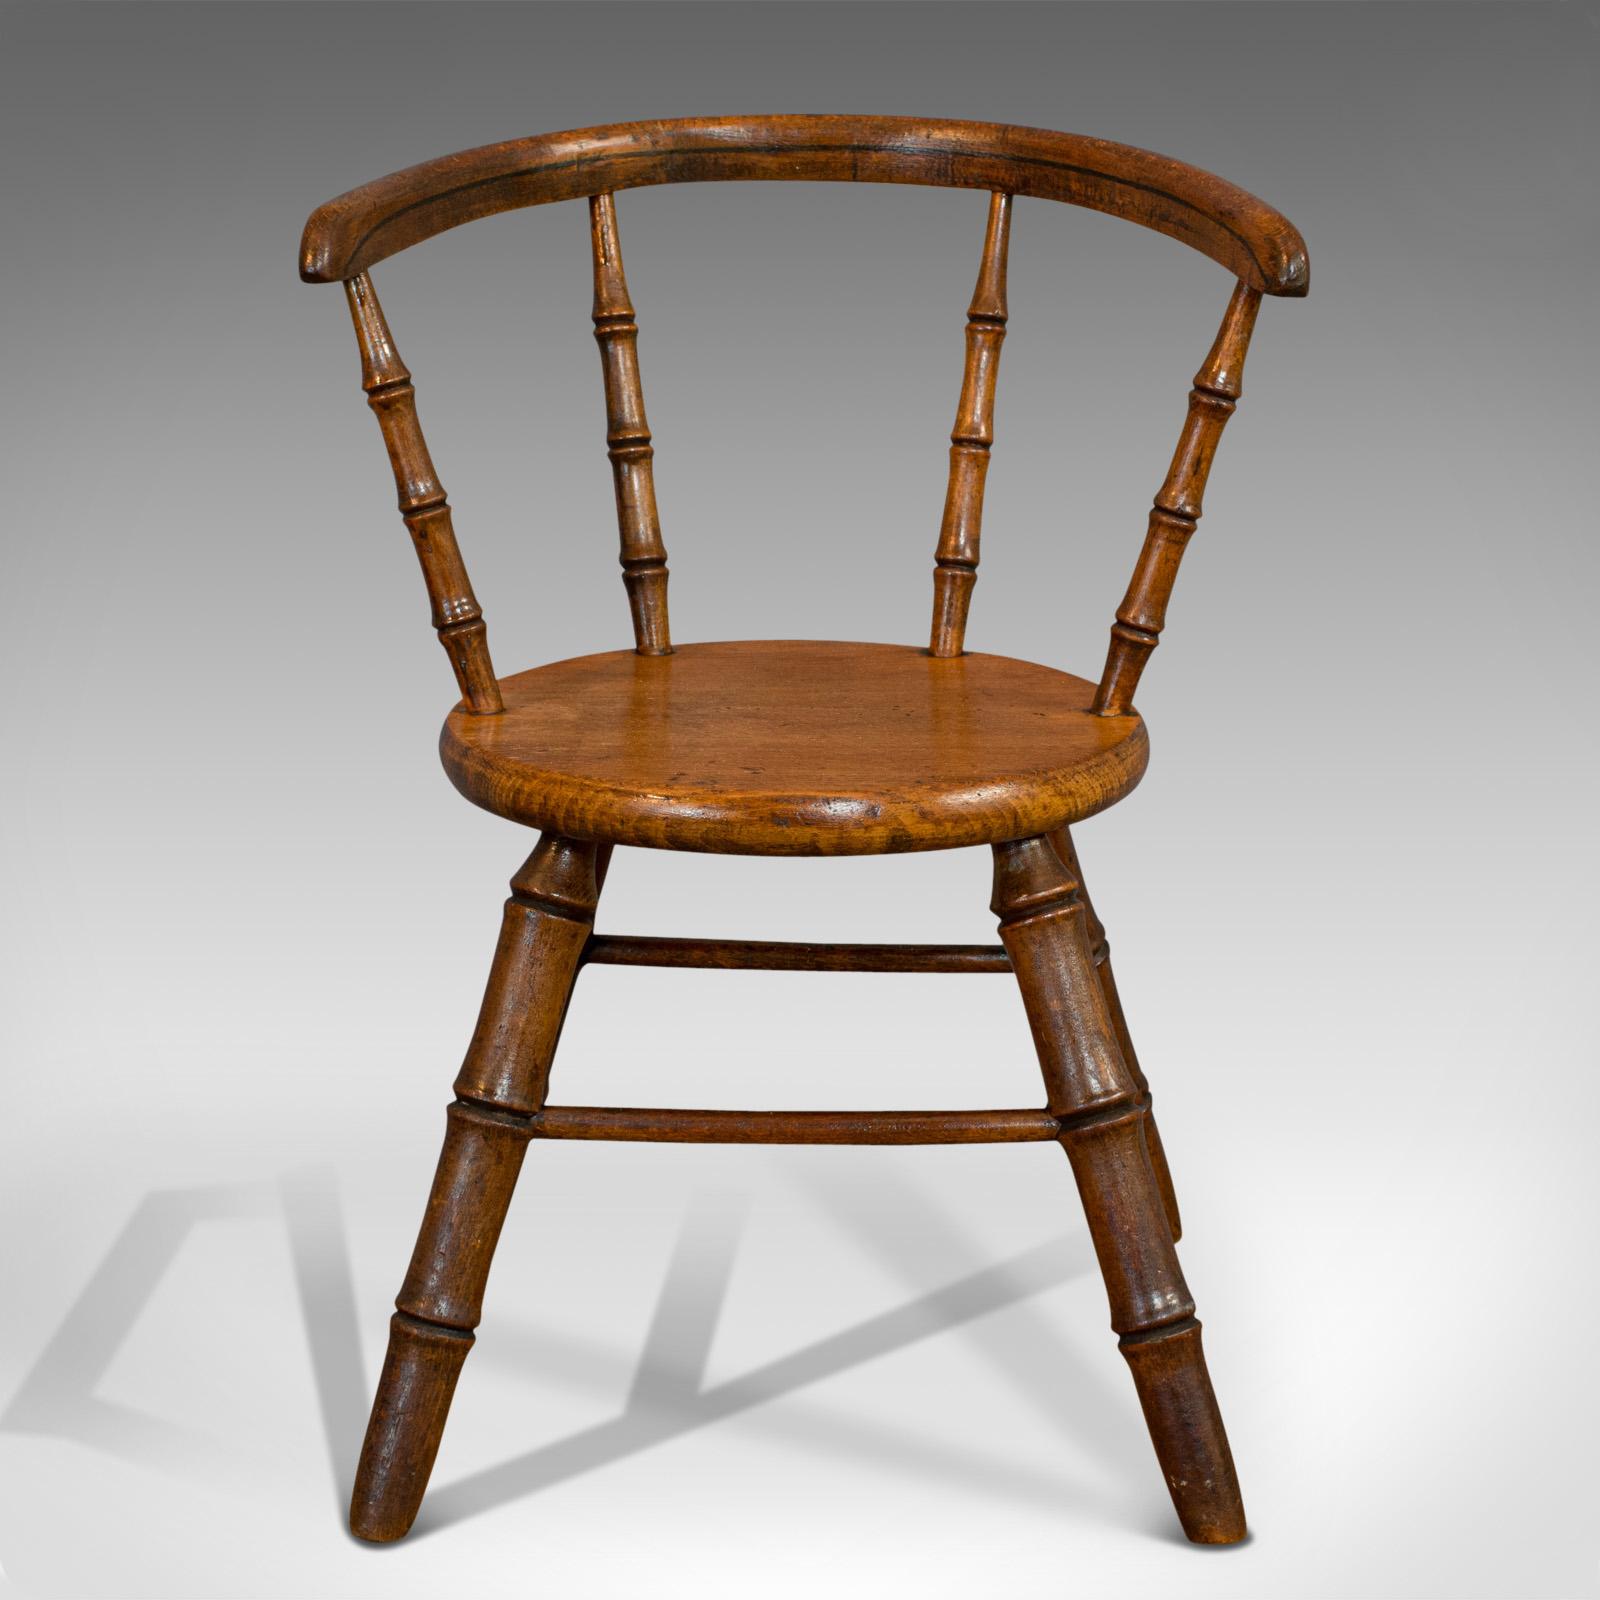 This is a small antique Windsor chair. An English, oak apprentice piece redolent of the High Wycombe school of miniature furniture, dating to the Victorian period, circa 1870. 

Superb chair realized in the miniature
Displays a desirable aged